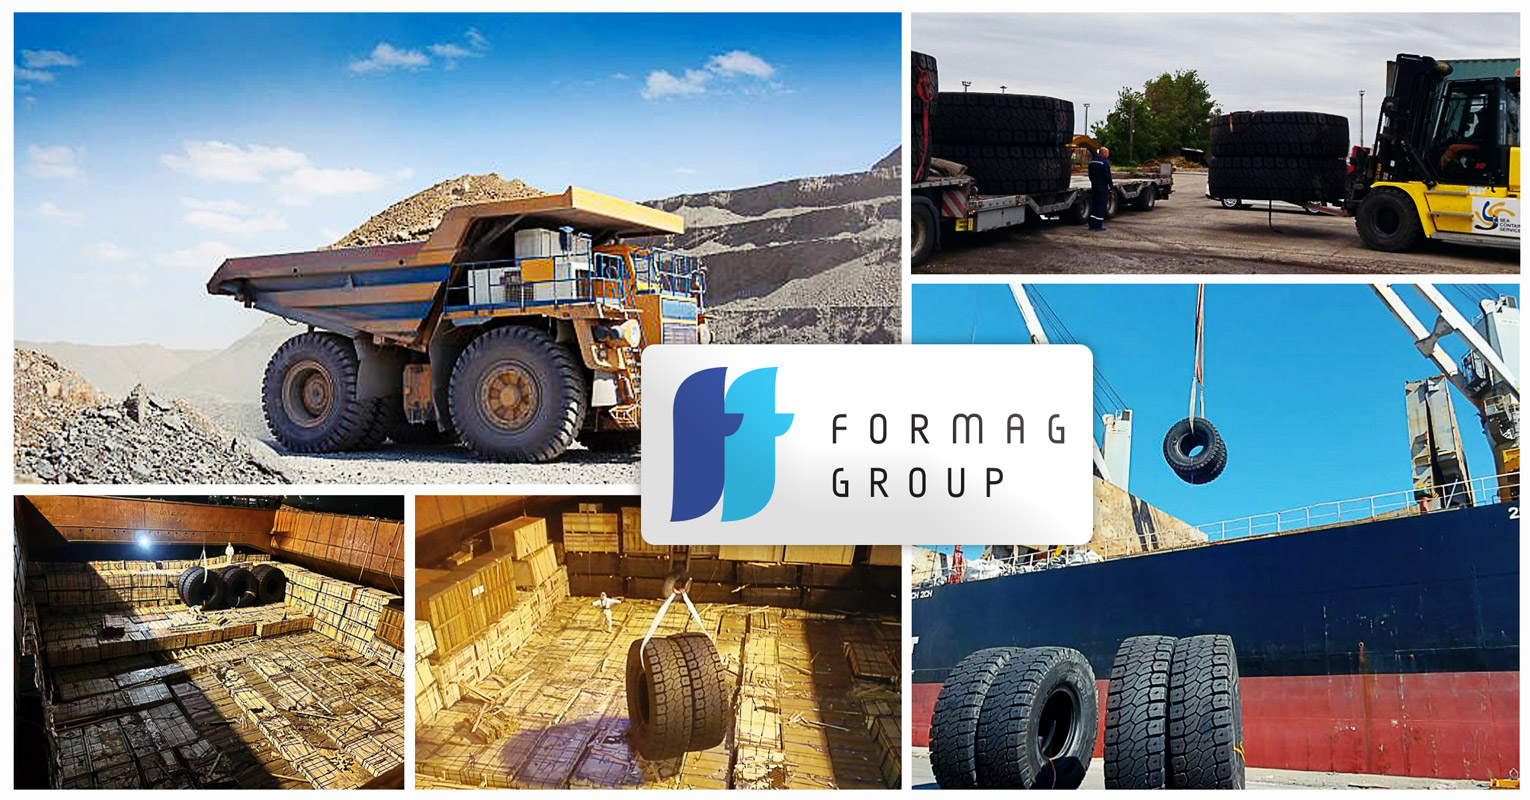 Formag Group Completed a Delivery of Oversized Tires for Mining Trucks from China to Ukraine